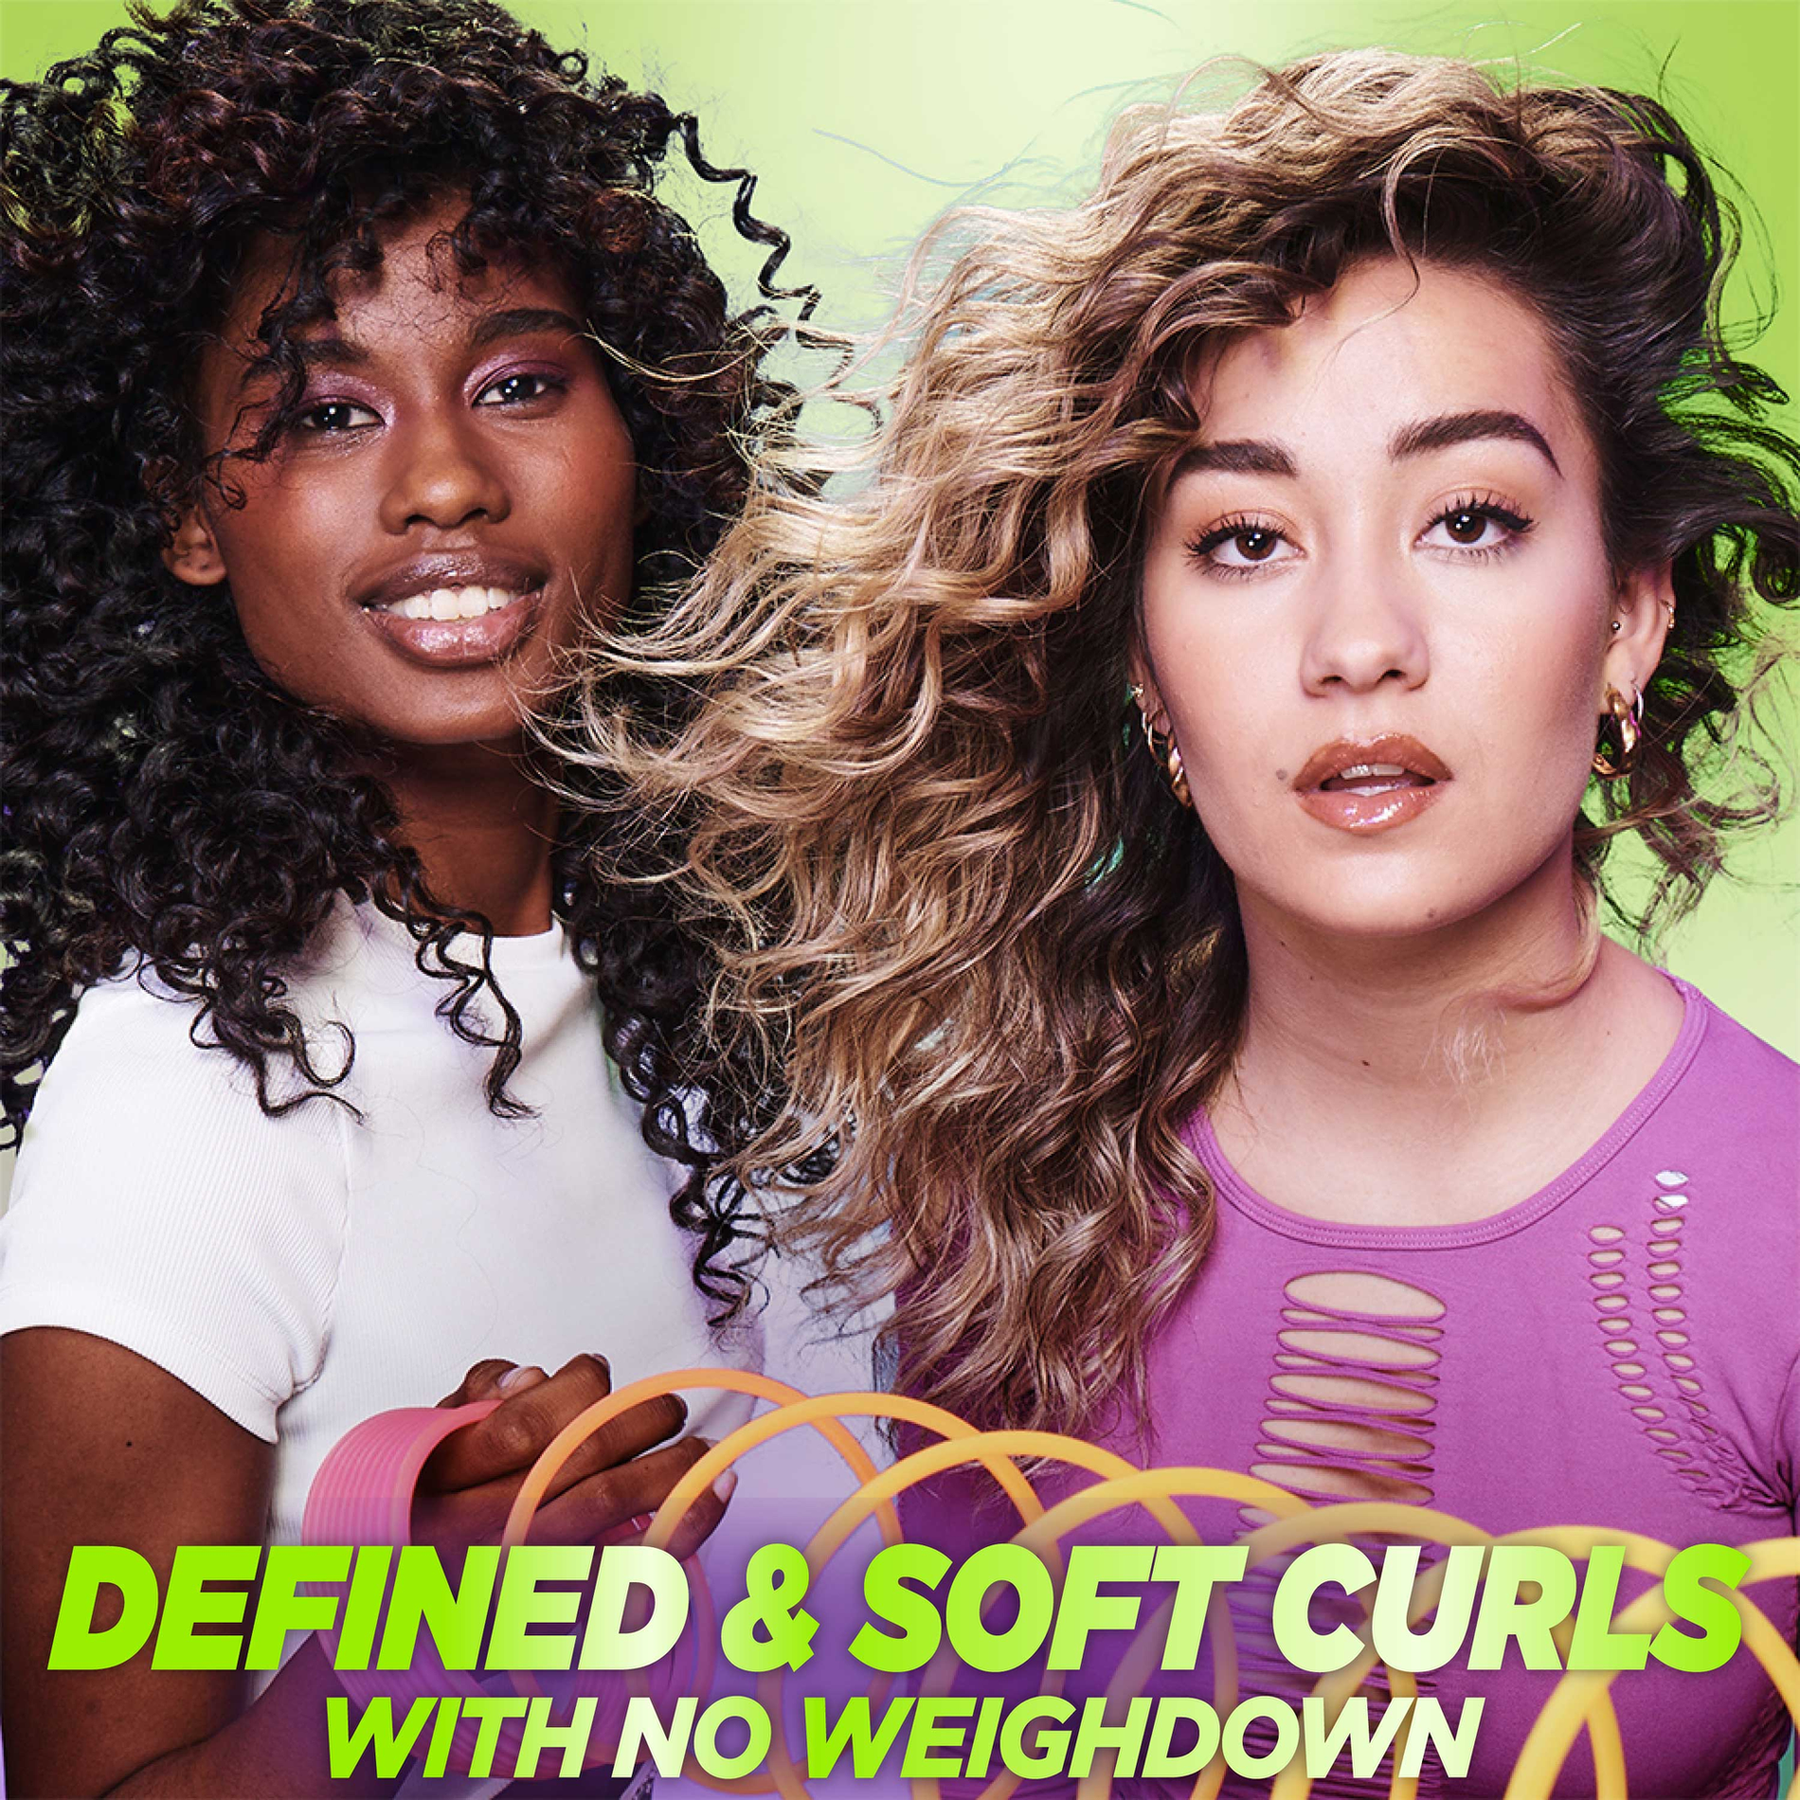 Garnier Fructis Style Curl Construct Creation Mousse, For Curly Hair, 6.8 oz - image 3 of 12